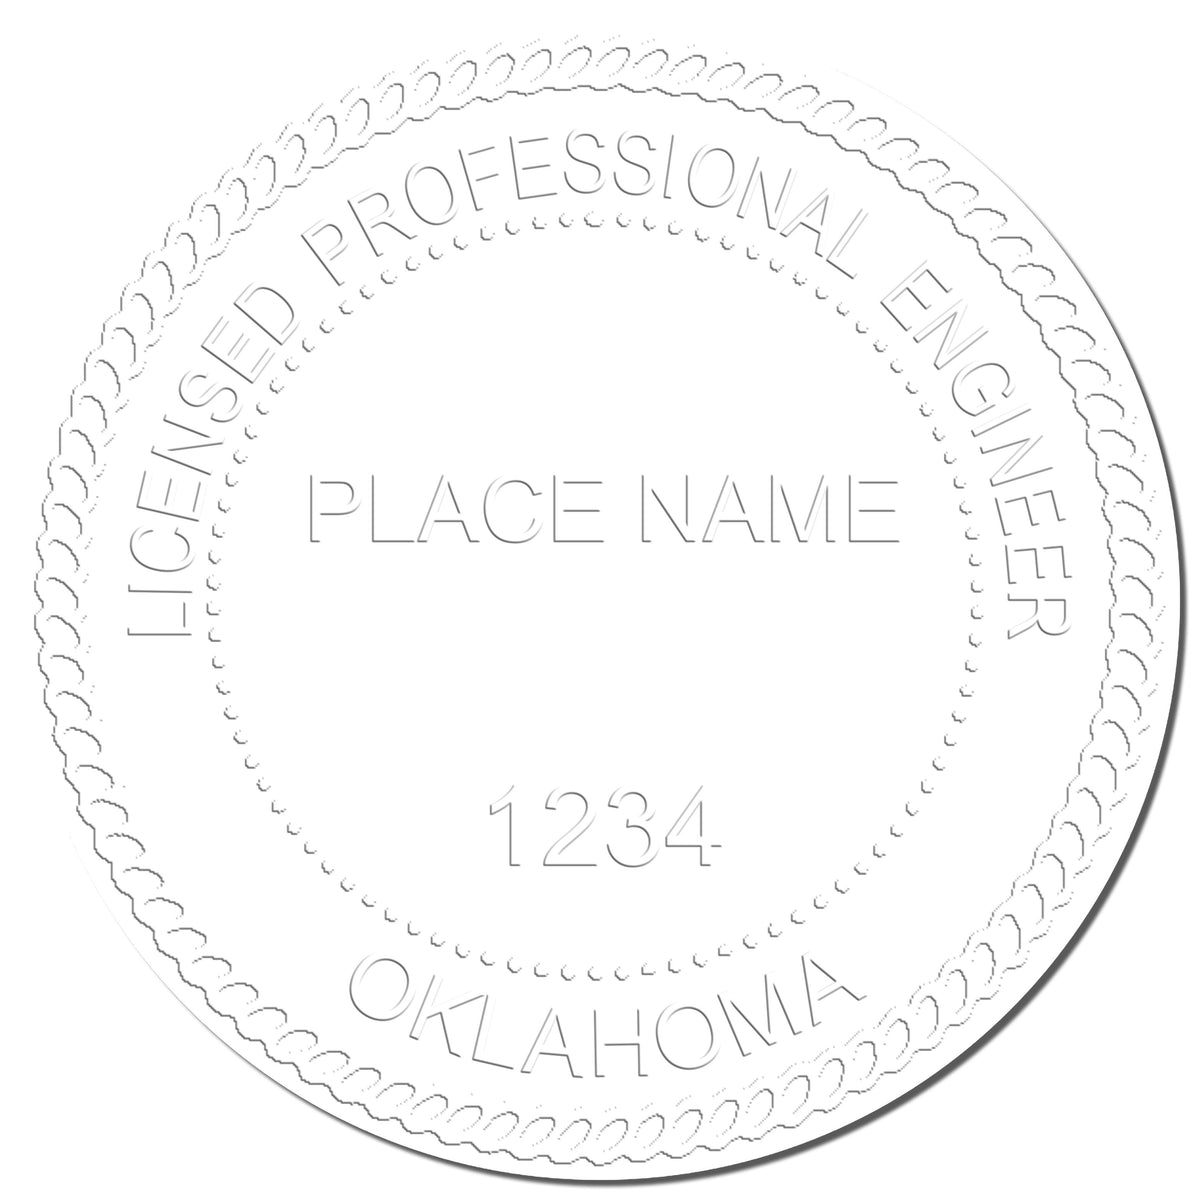 This paper is stamped with a sample imprint of the Gift Oklahoma Engineer Seal, signifying its quality and reliability.